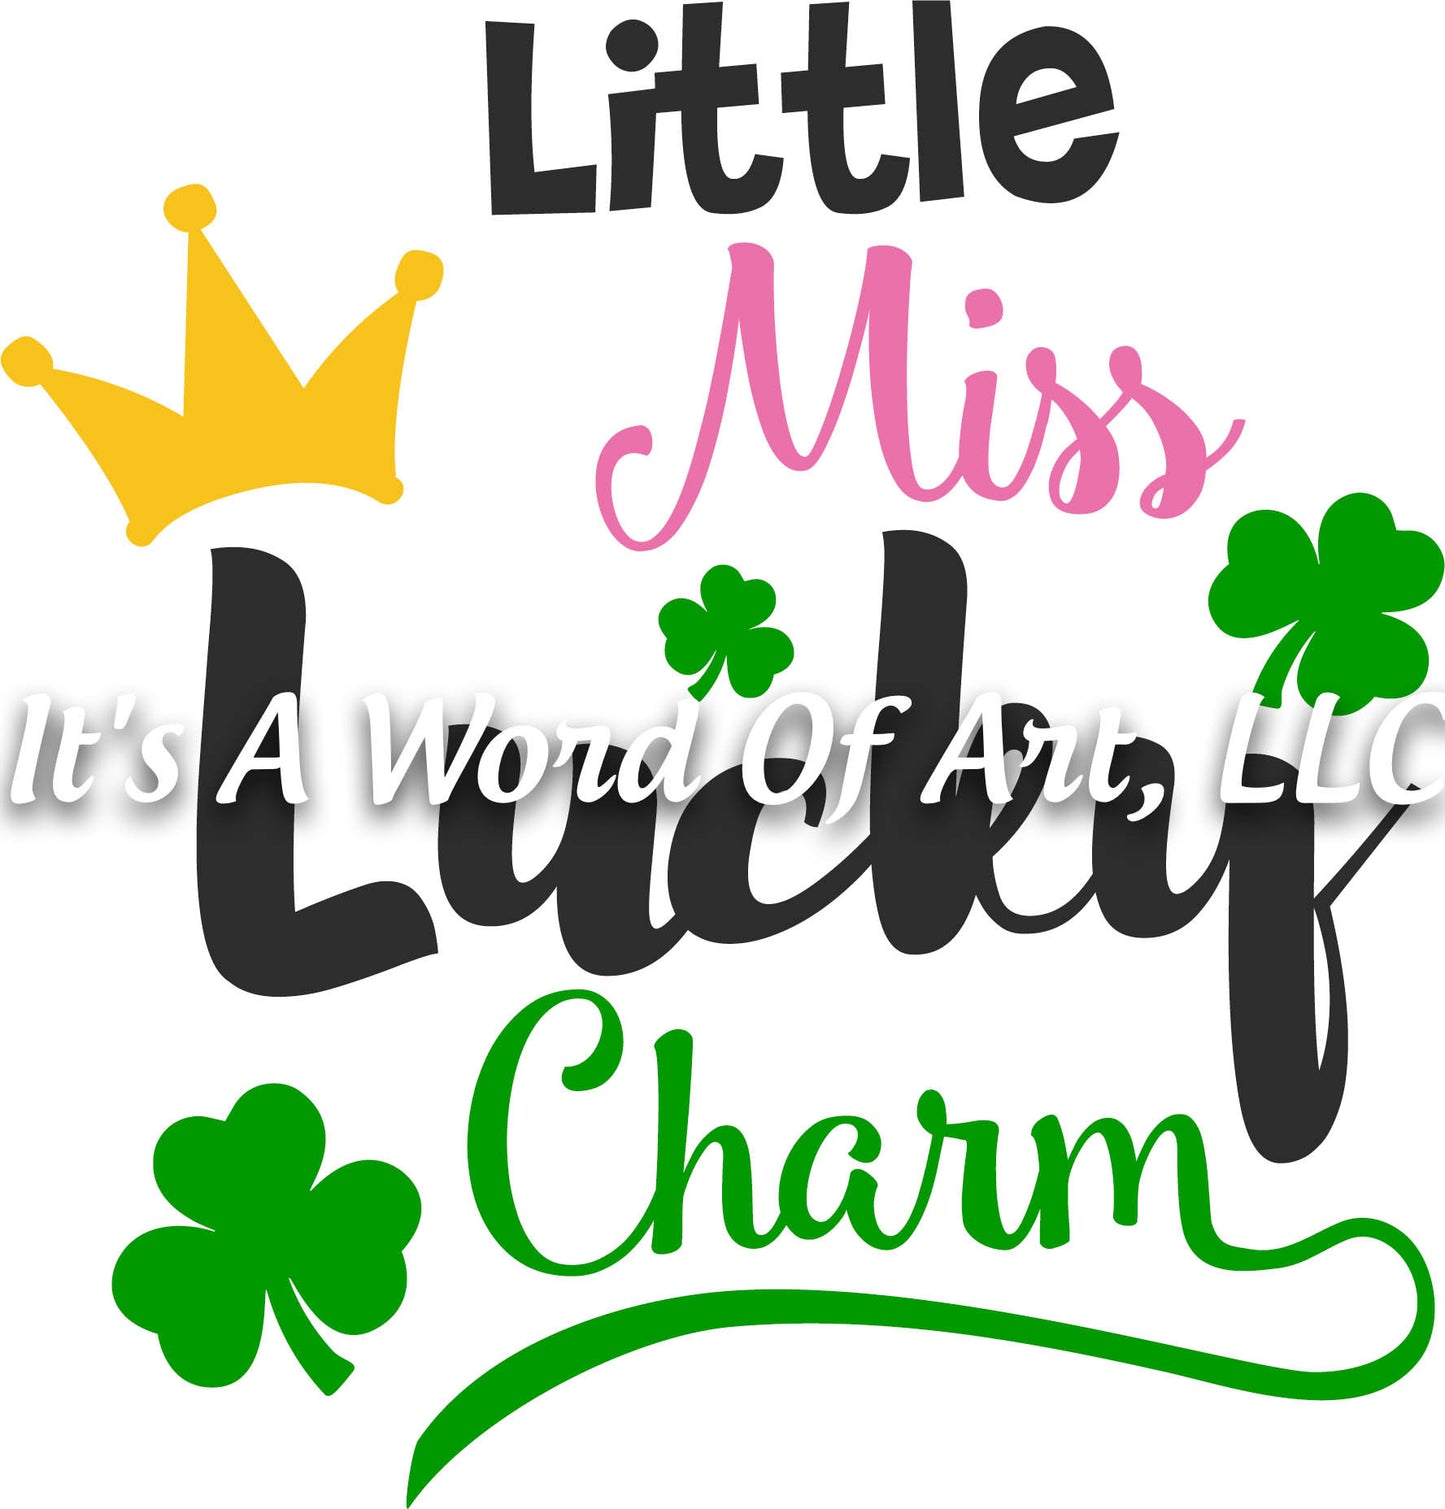 St. Patricks Day 11 - Little Miss Lucky Charm Cute Kids Shirt - Sublimation Transfer Set/Ready To Press Sublimation Transfer